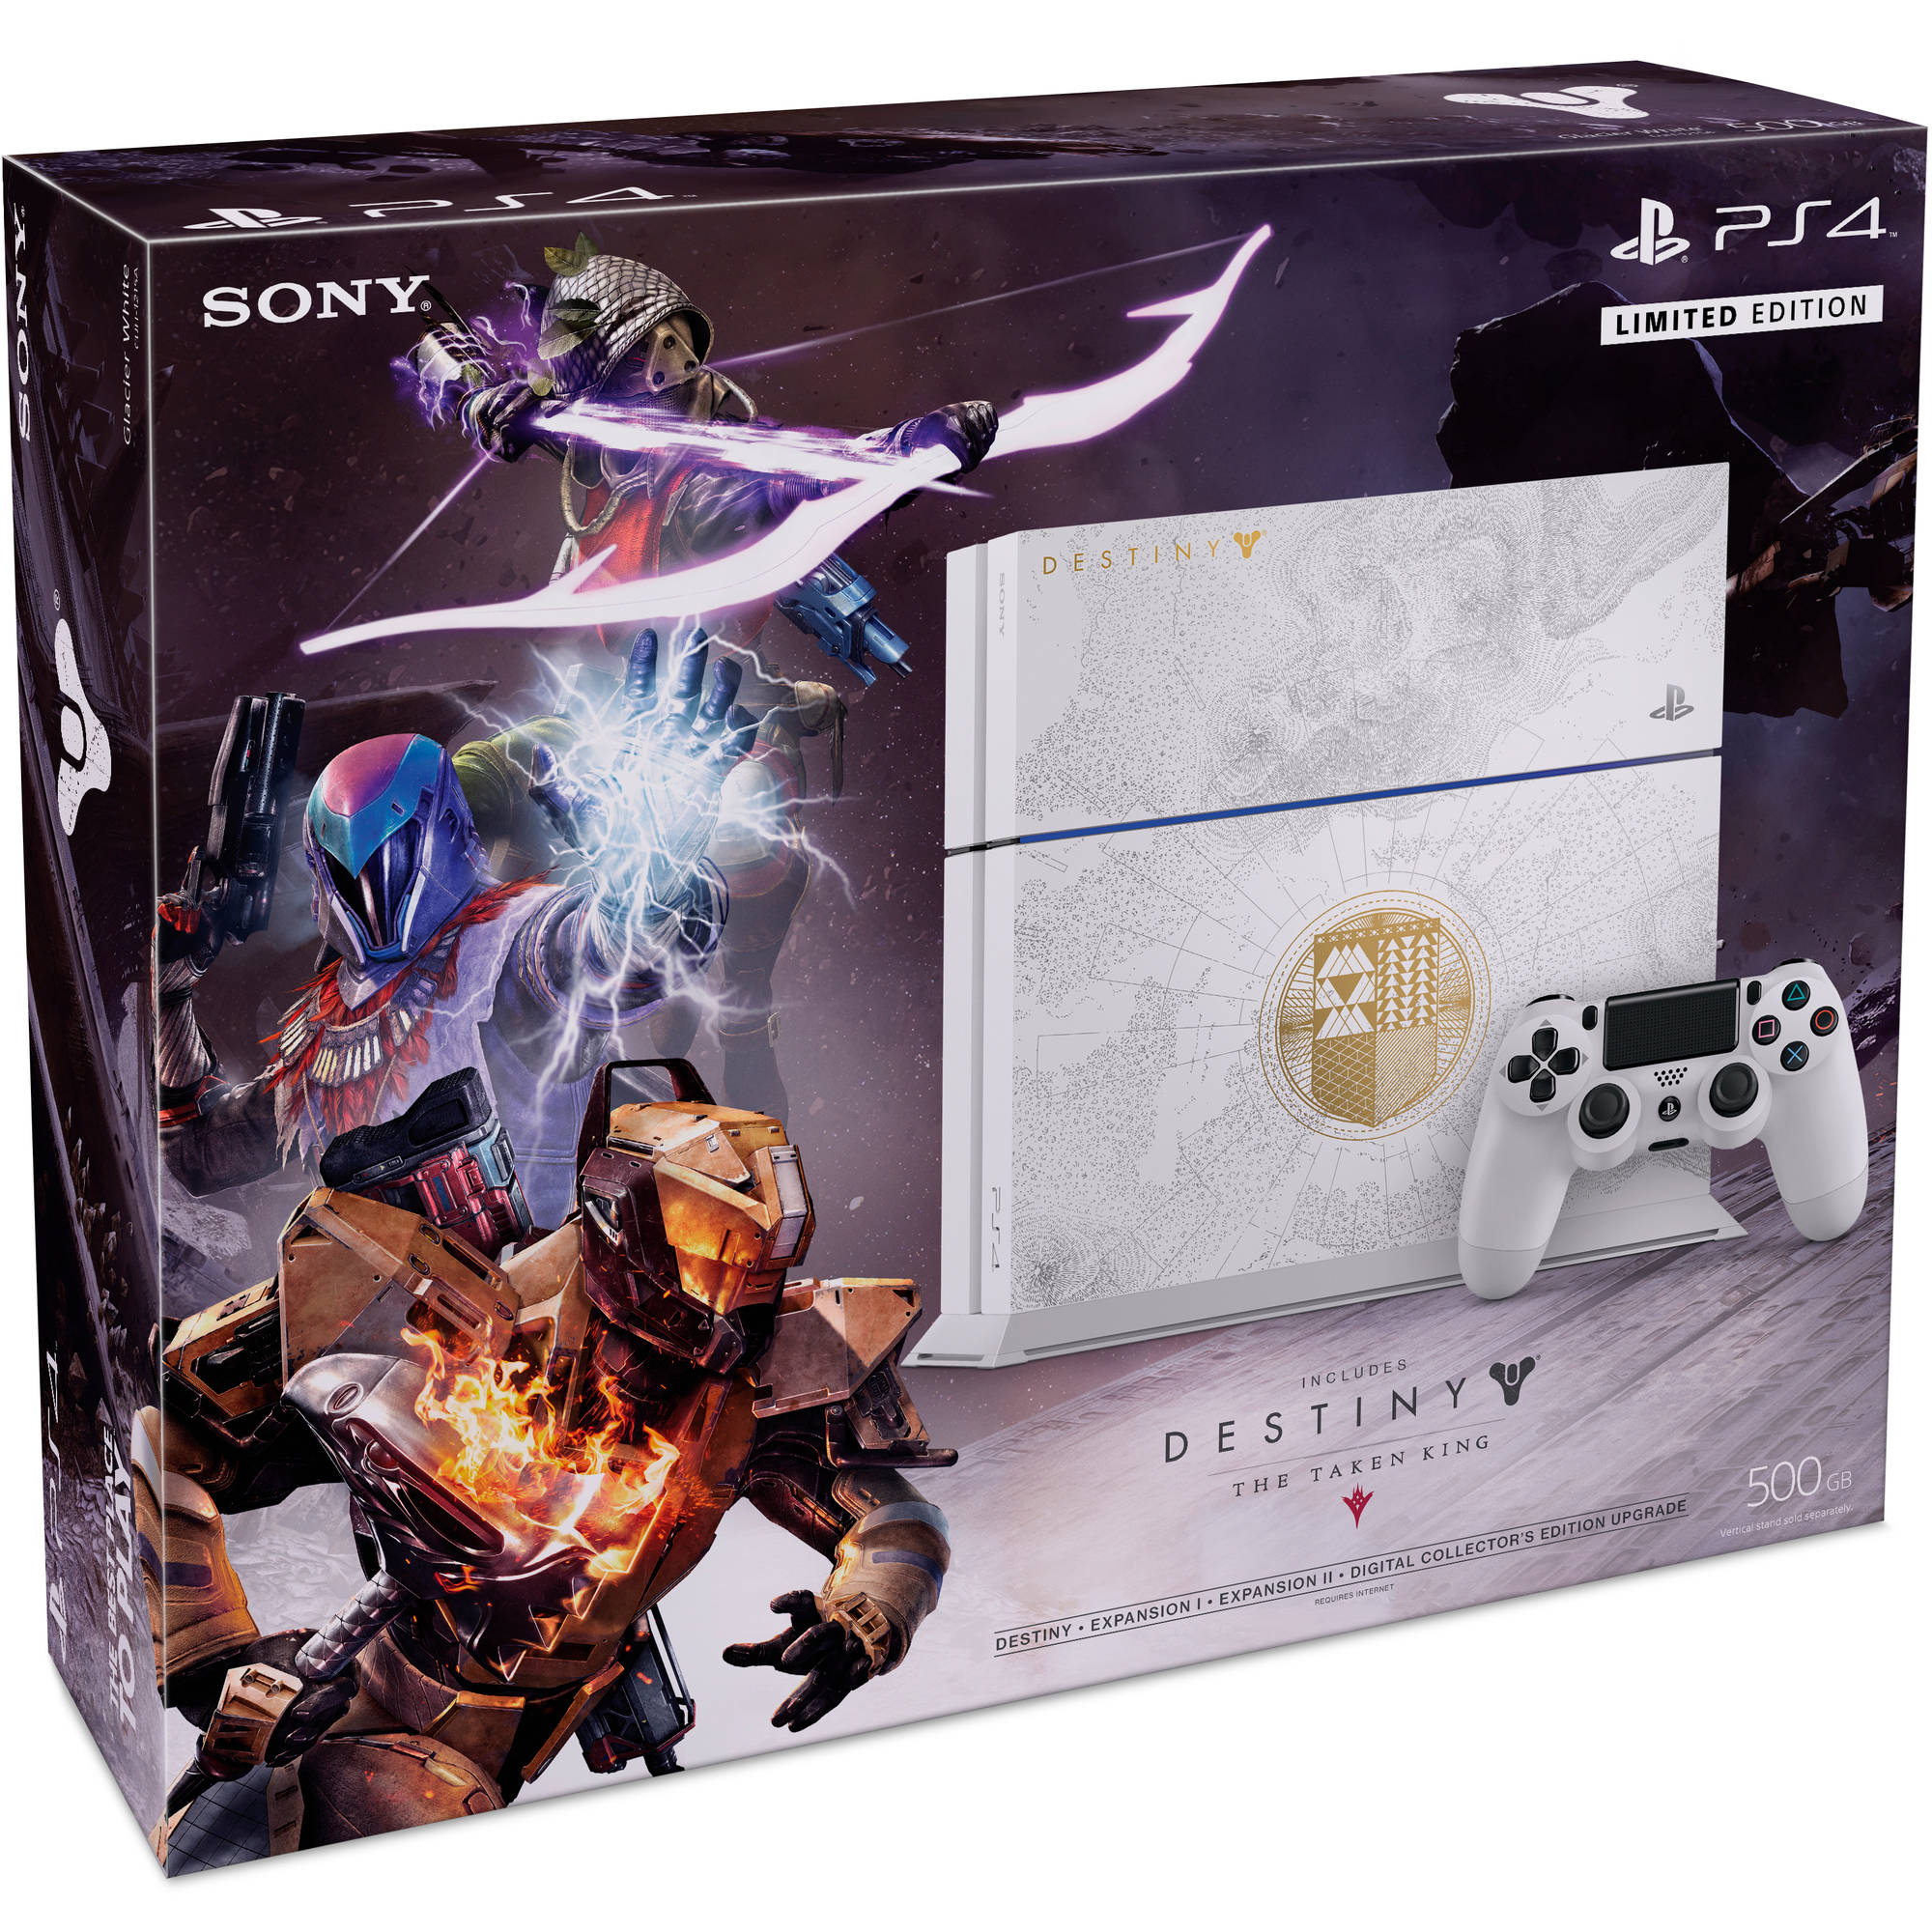 PlayStation 4 500GB Limited Edition Console - Destiny: The Taken King Bundle [Discontinued] (Used/Pre-Owned) - image 3 of 10